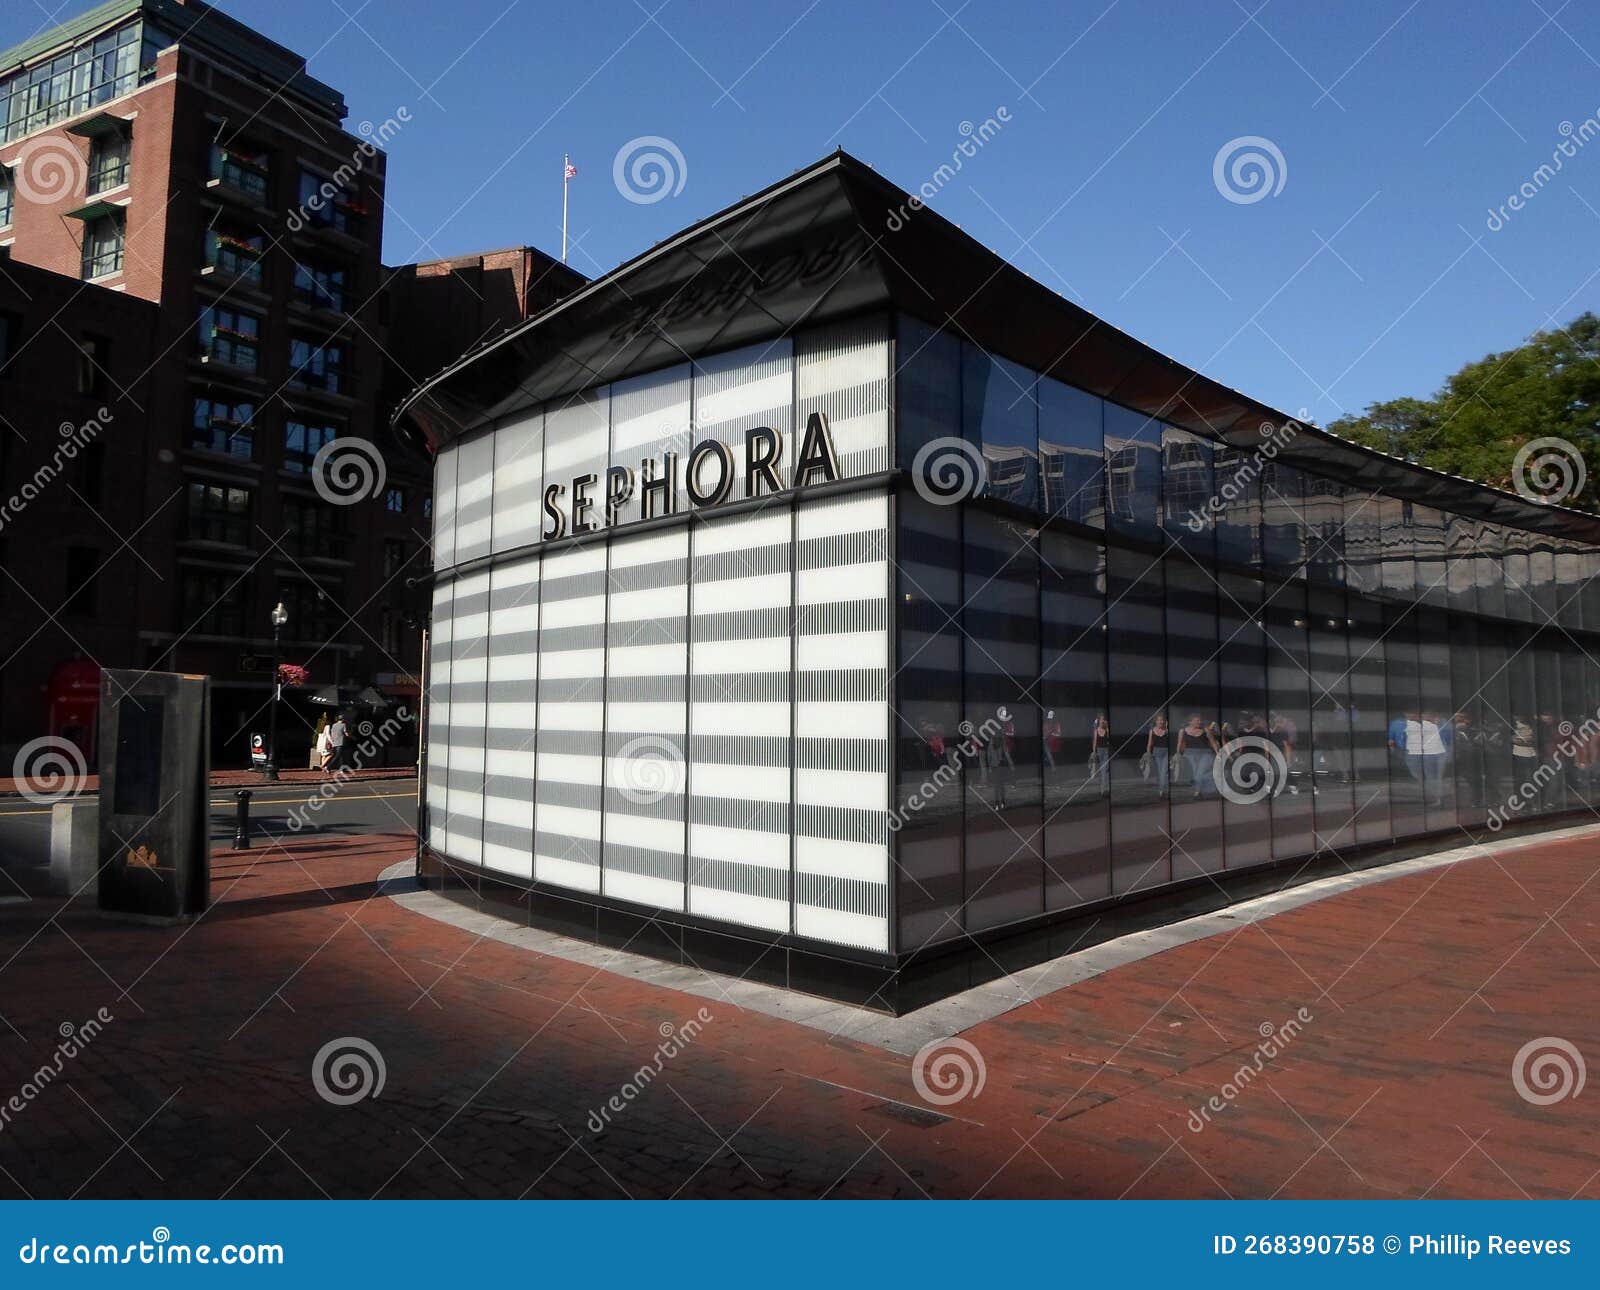 Sephora Opens at historic Faneuil Hall Marketplace in a new Glass